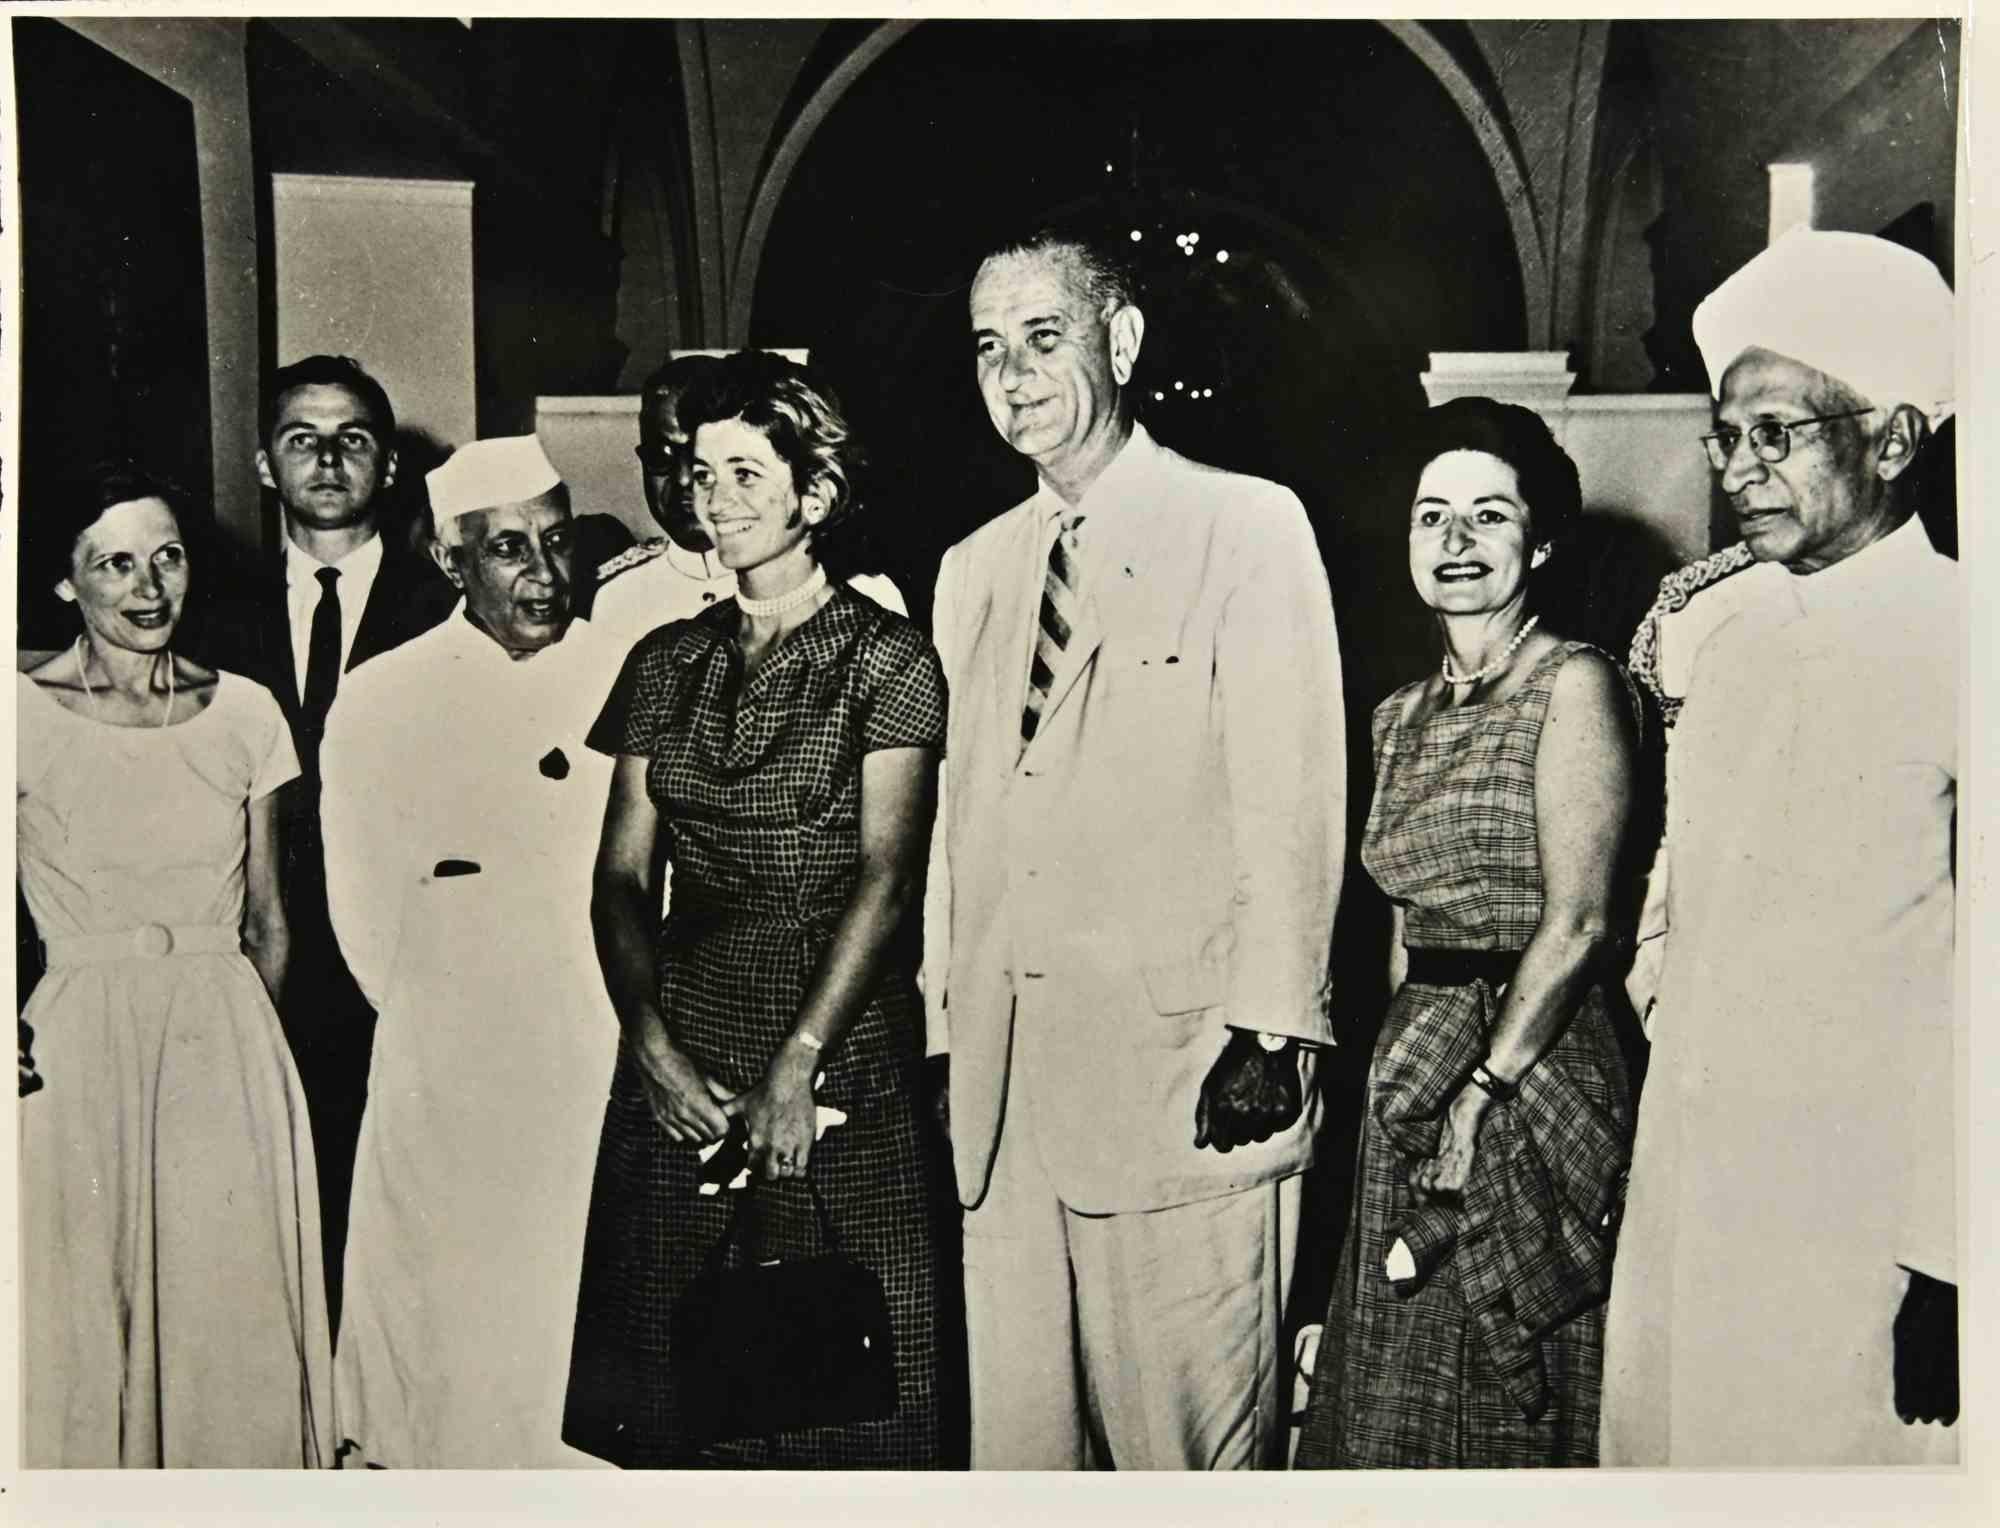 Unknown Landscape Photograph - Vice President Lyndon B. Johnson in India - Vintage Photograph - 1960s